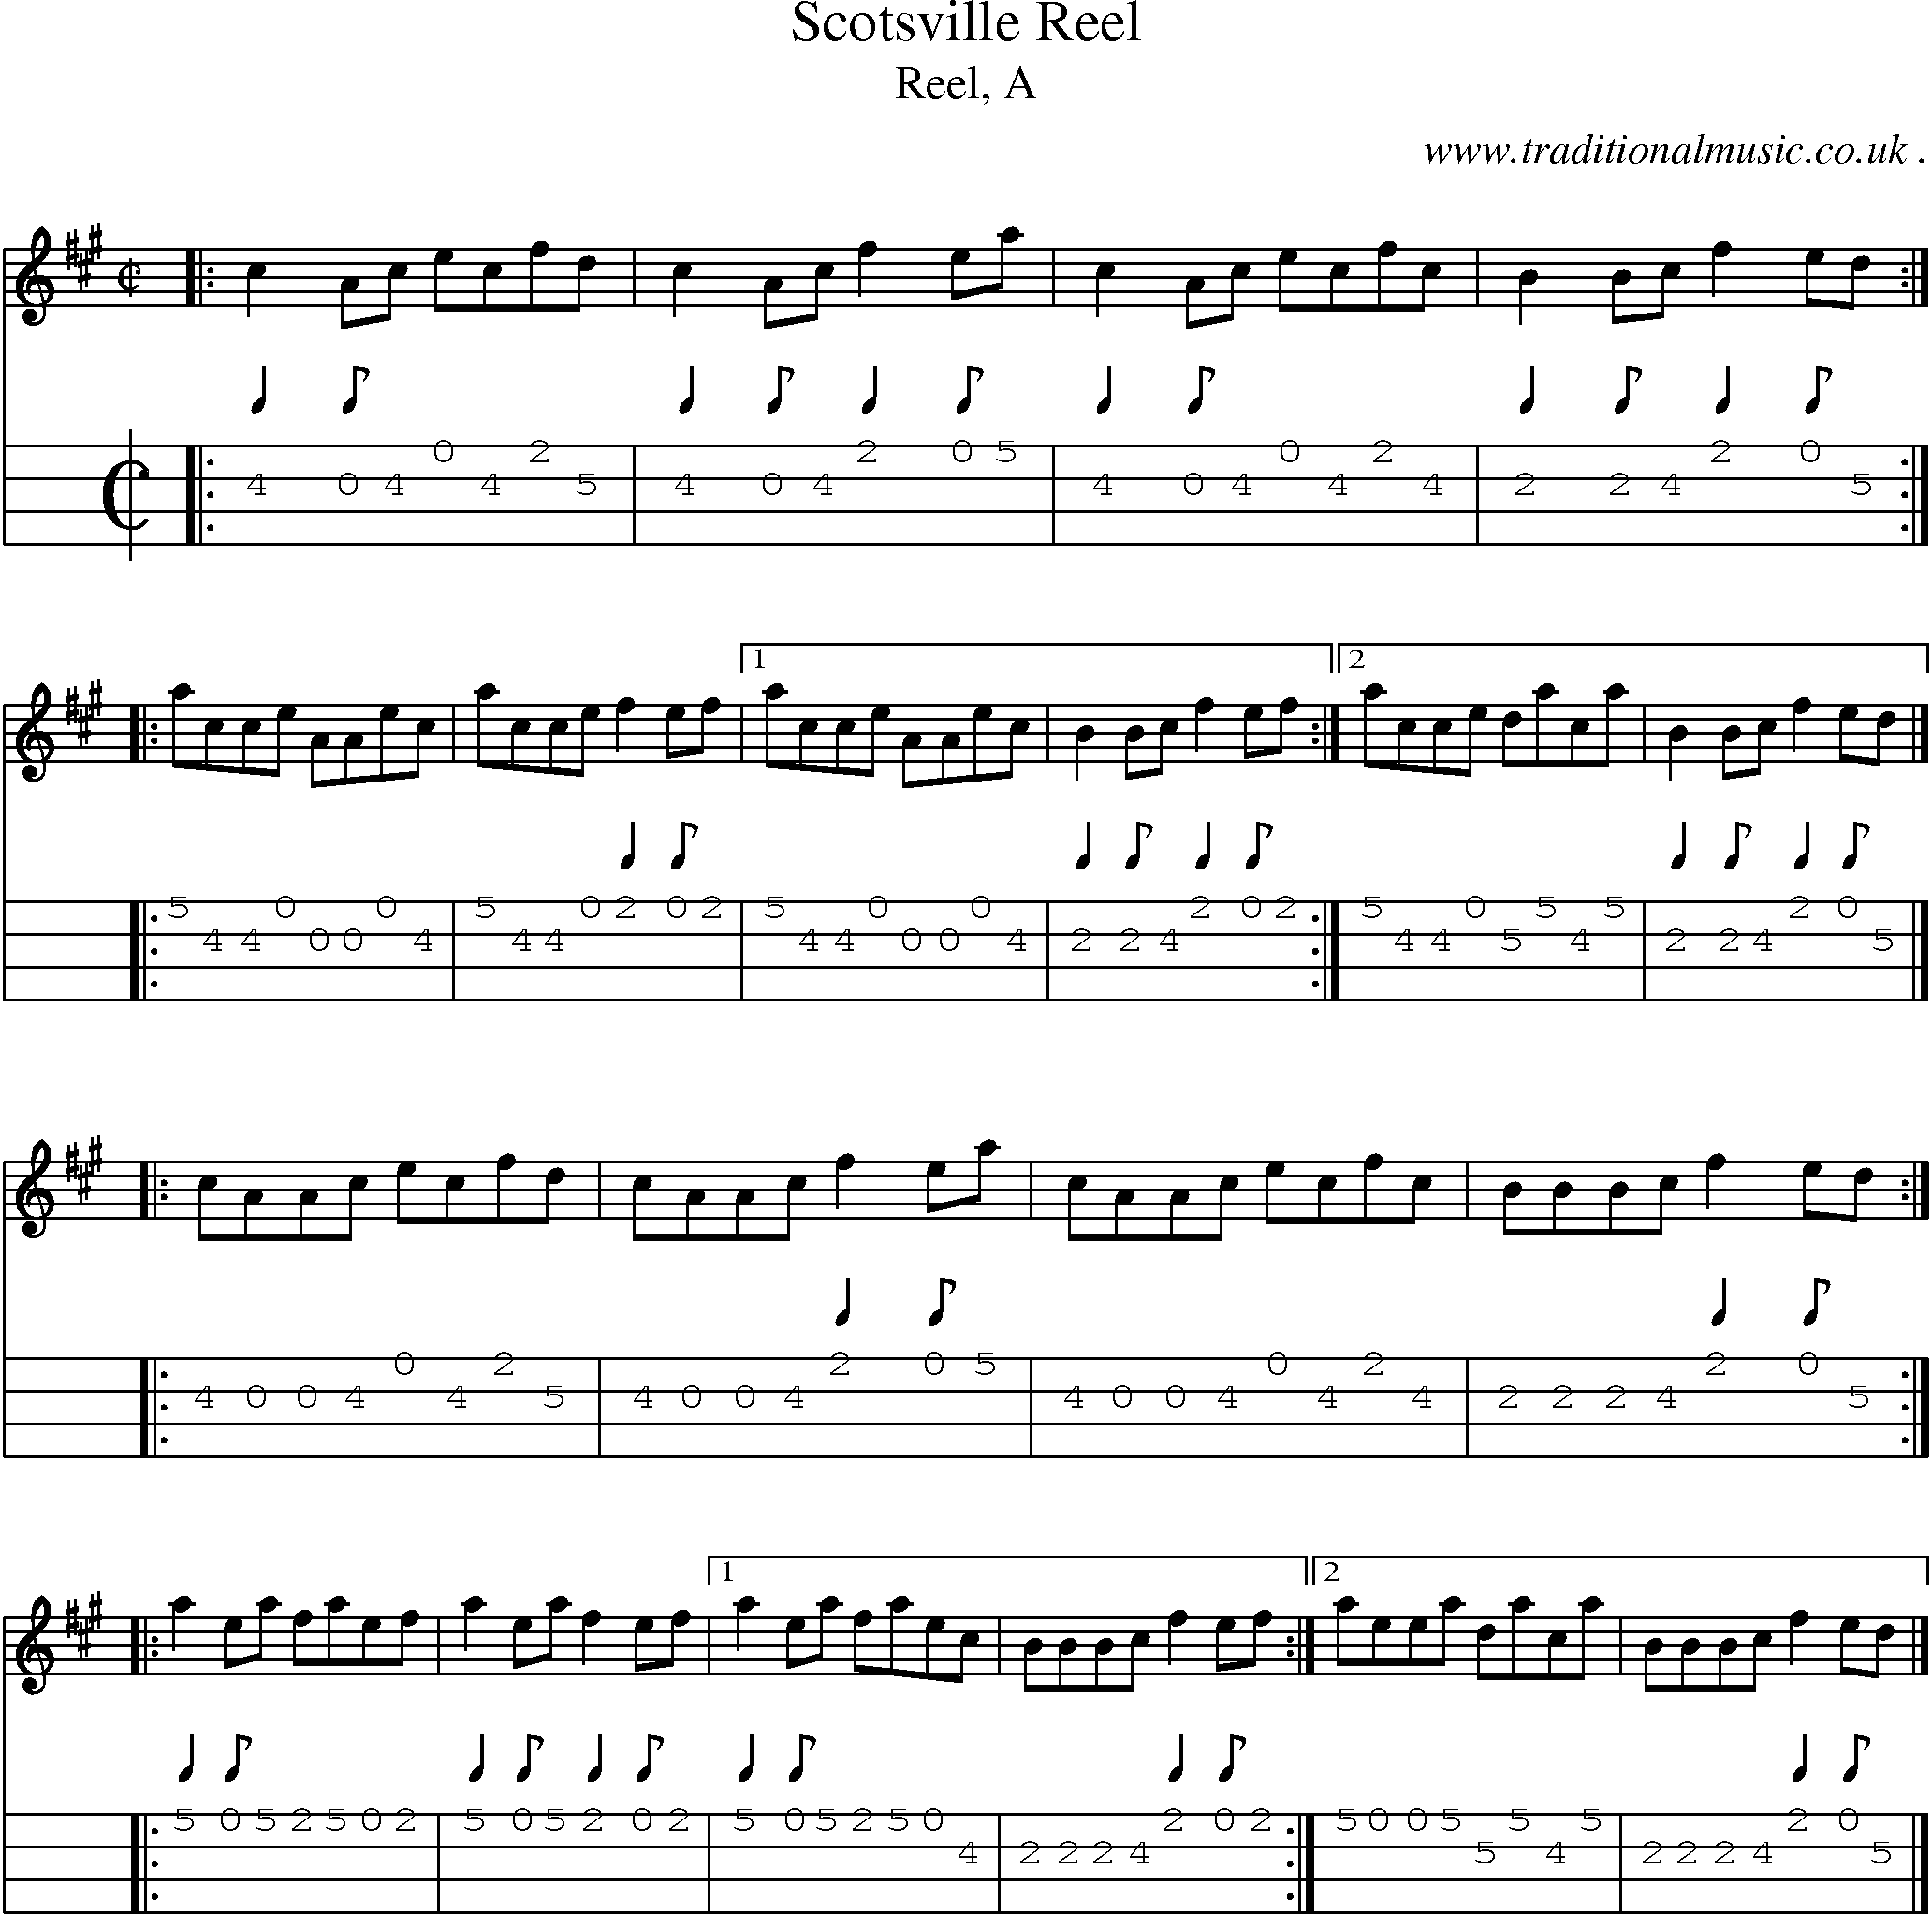 Sheet-music  score, Chords and Mandolin Tabs for Scotsville Reel